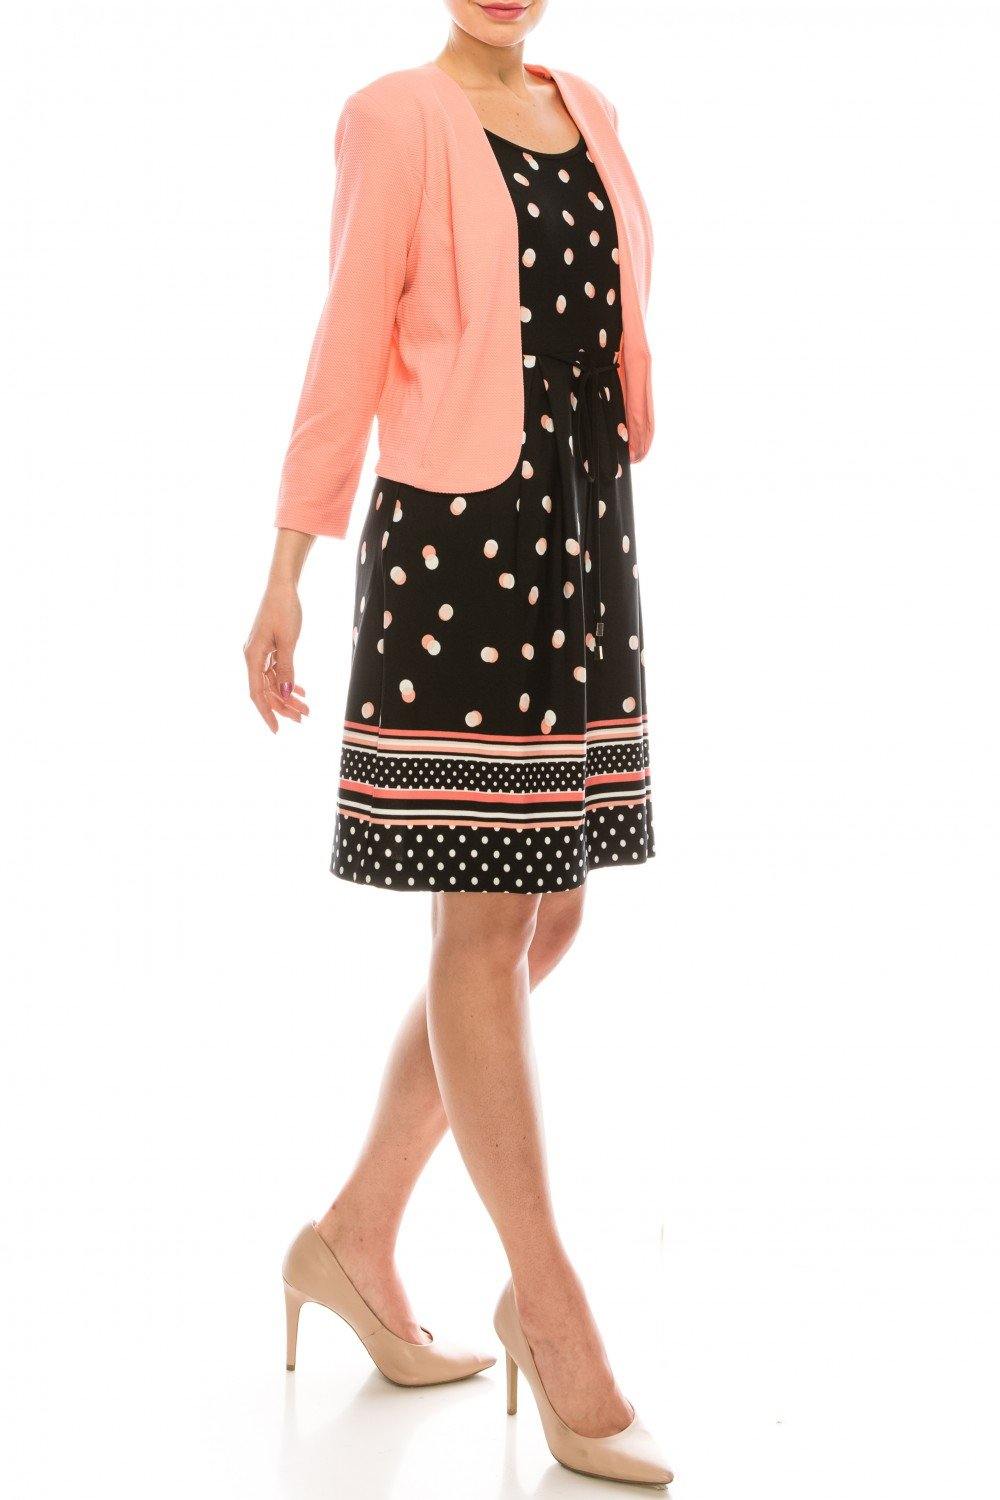 Studio One Polka Dotted Two Piece Jacket Dress - The Dress Outlet